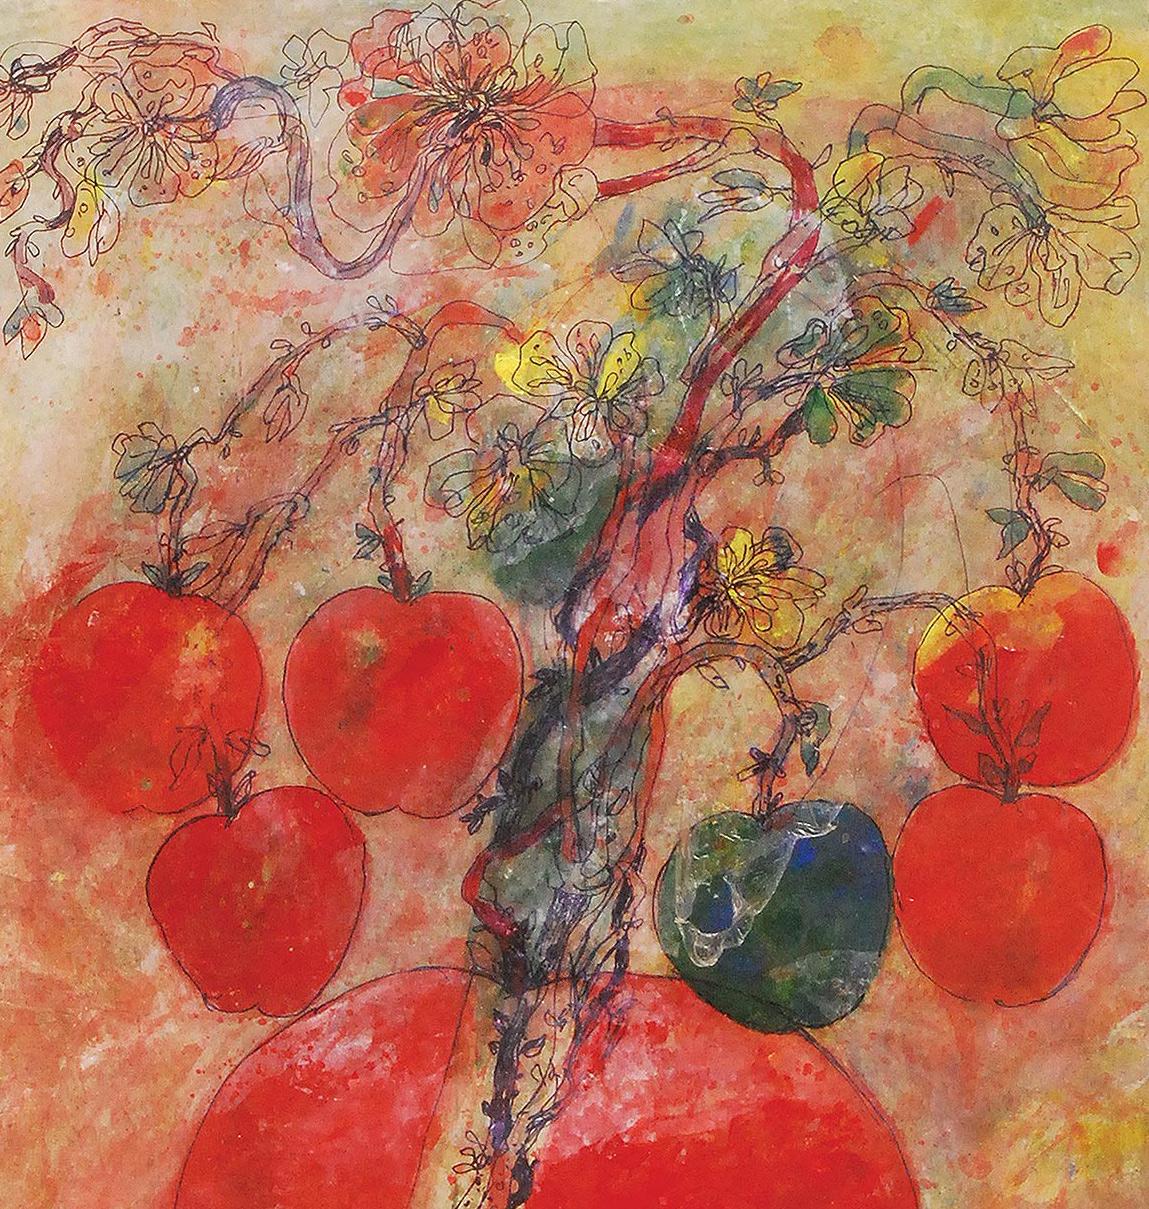 Sunil Das - Apples - 30 x 20 inches (unframed size)
Mixed Media on Paper
Inclusive of shipment in ready to hang form.

Sunil Das (1939-2015) was a Master Modern Indian Artist from Bengal. Extremely successful right from his college days, Sunil Das